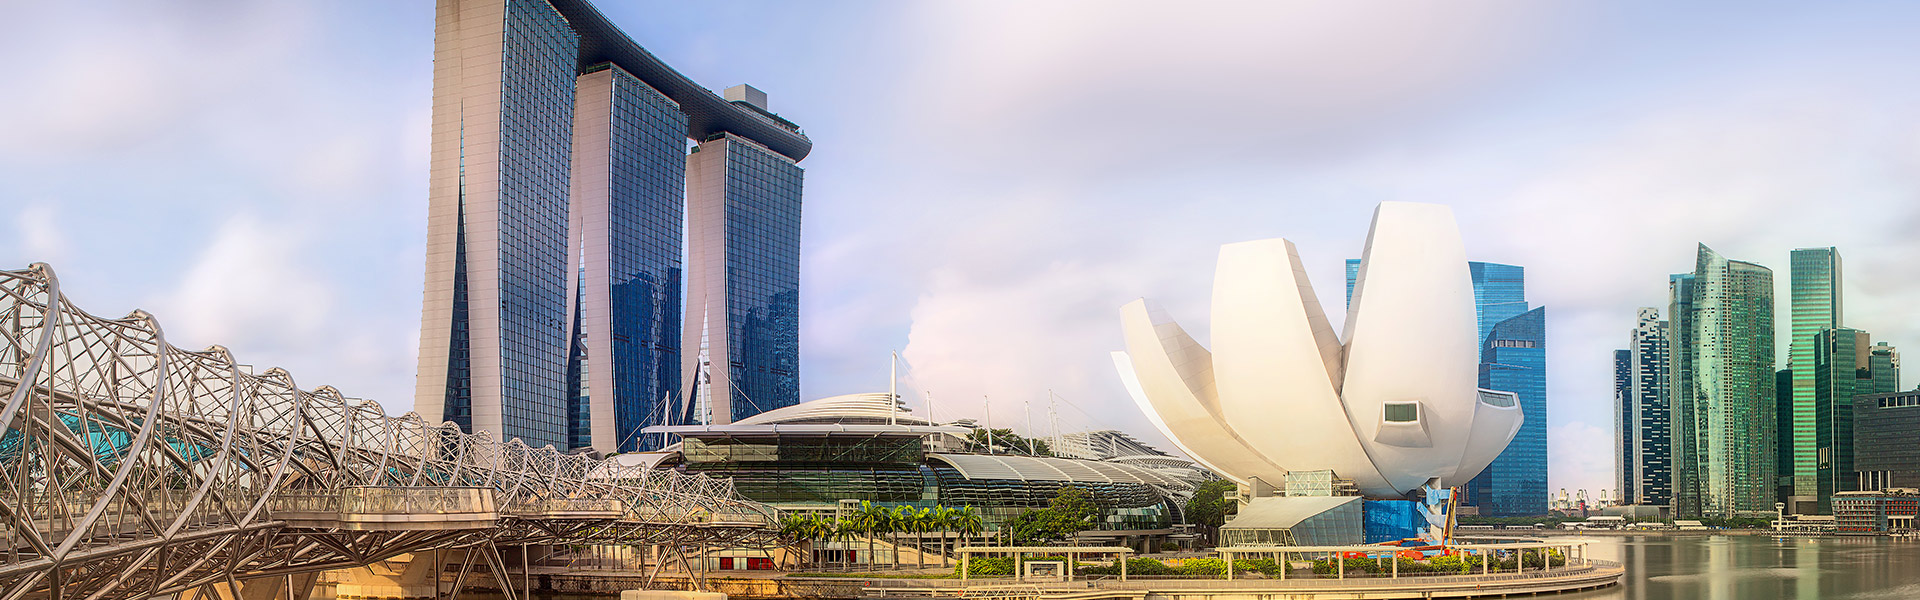 Marina Bay Sands, the most spectacular symbol of Singapore